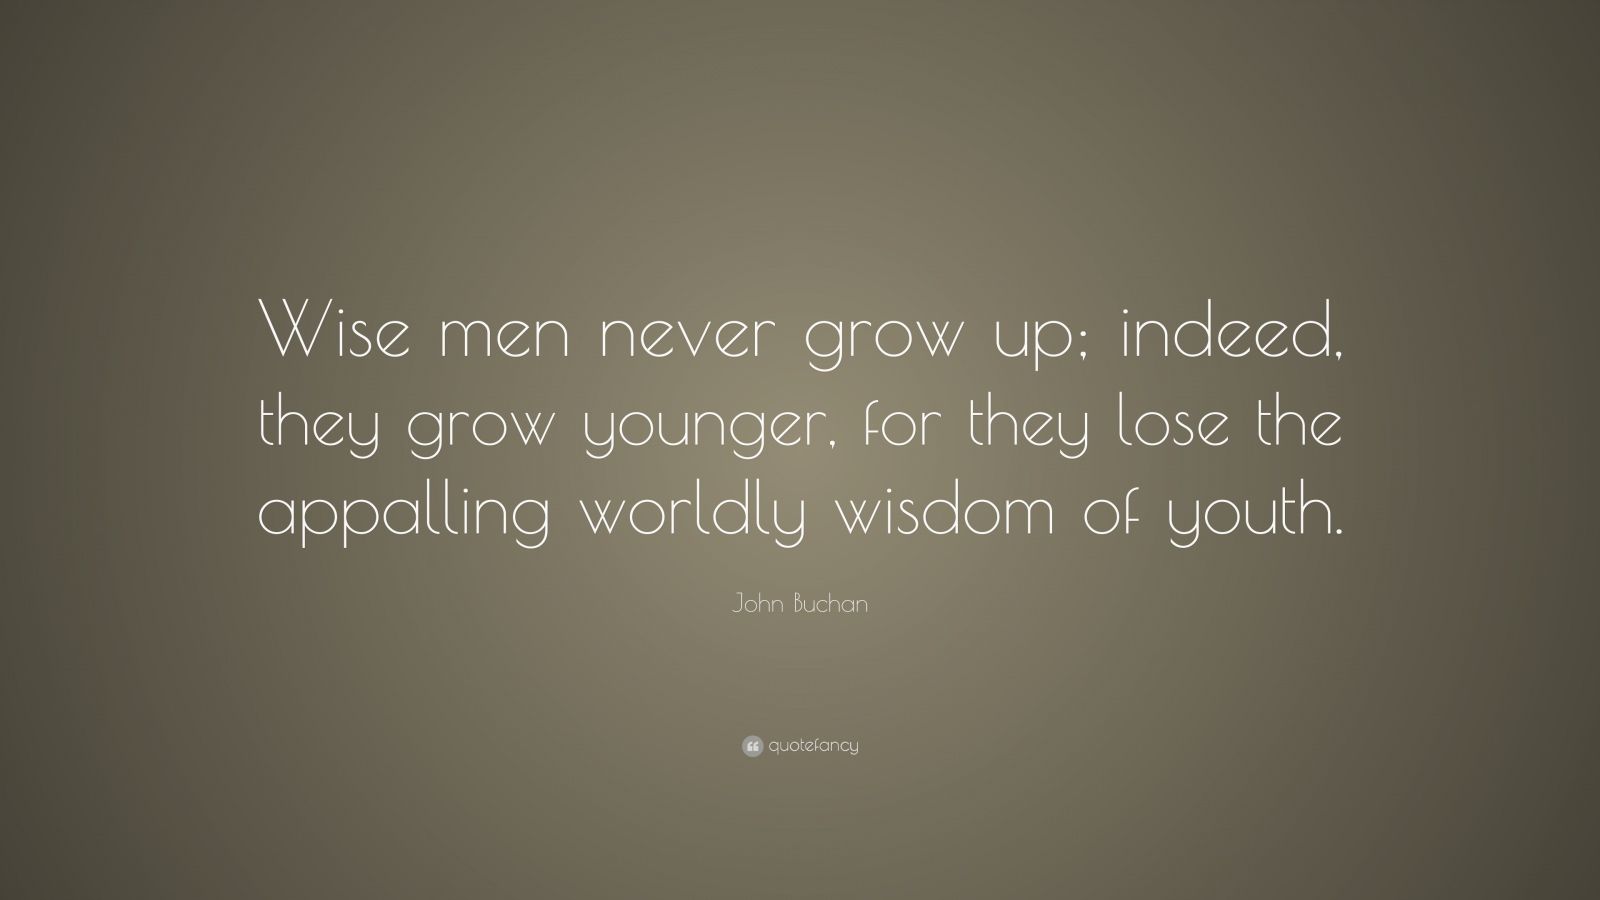 John Buchan Quote: “Wise men never grow up; indeed, they grow younger